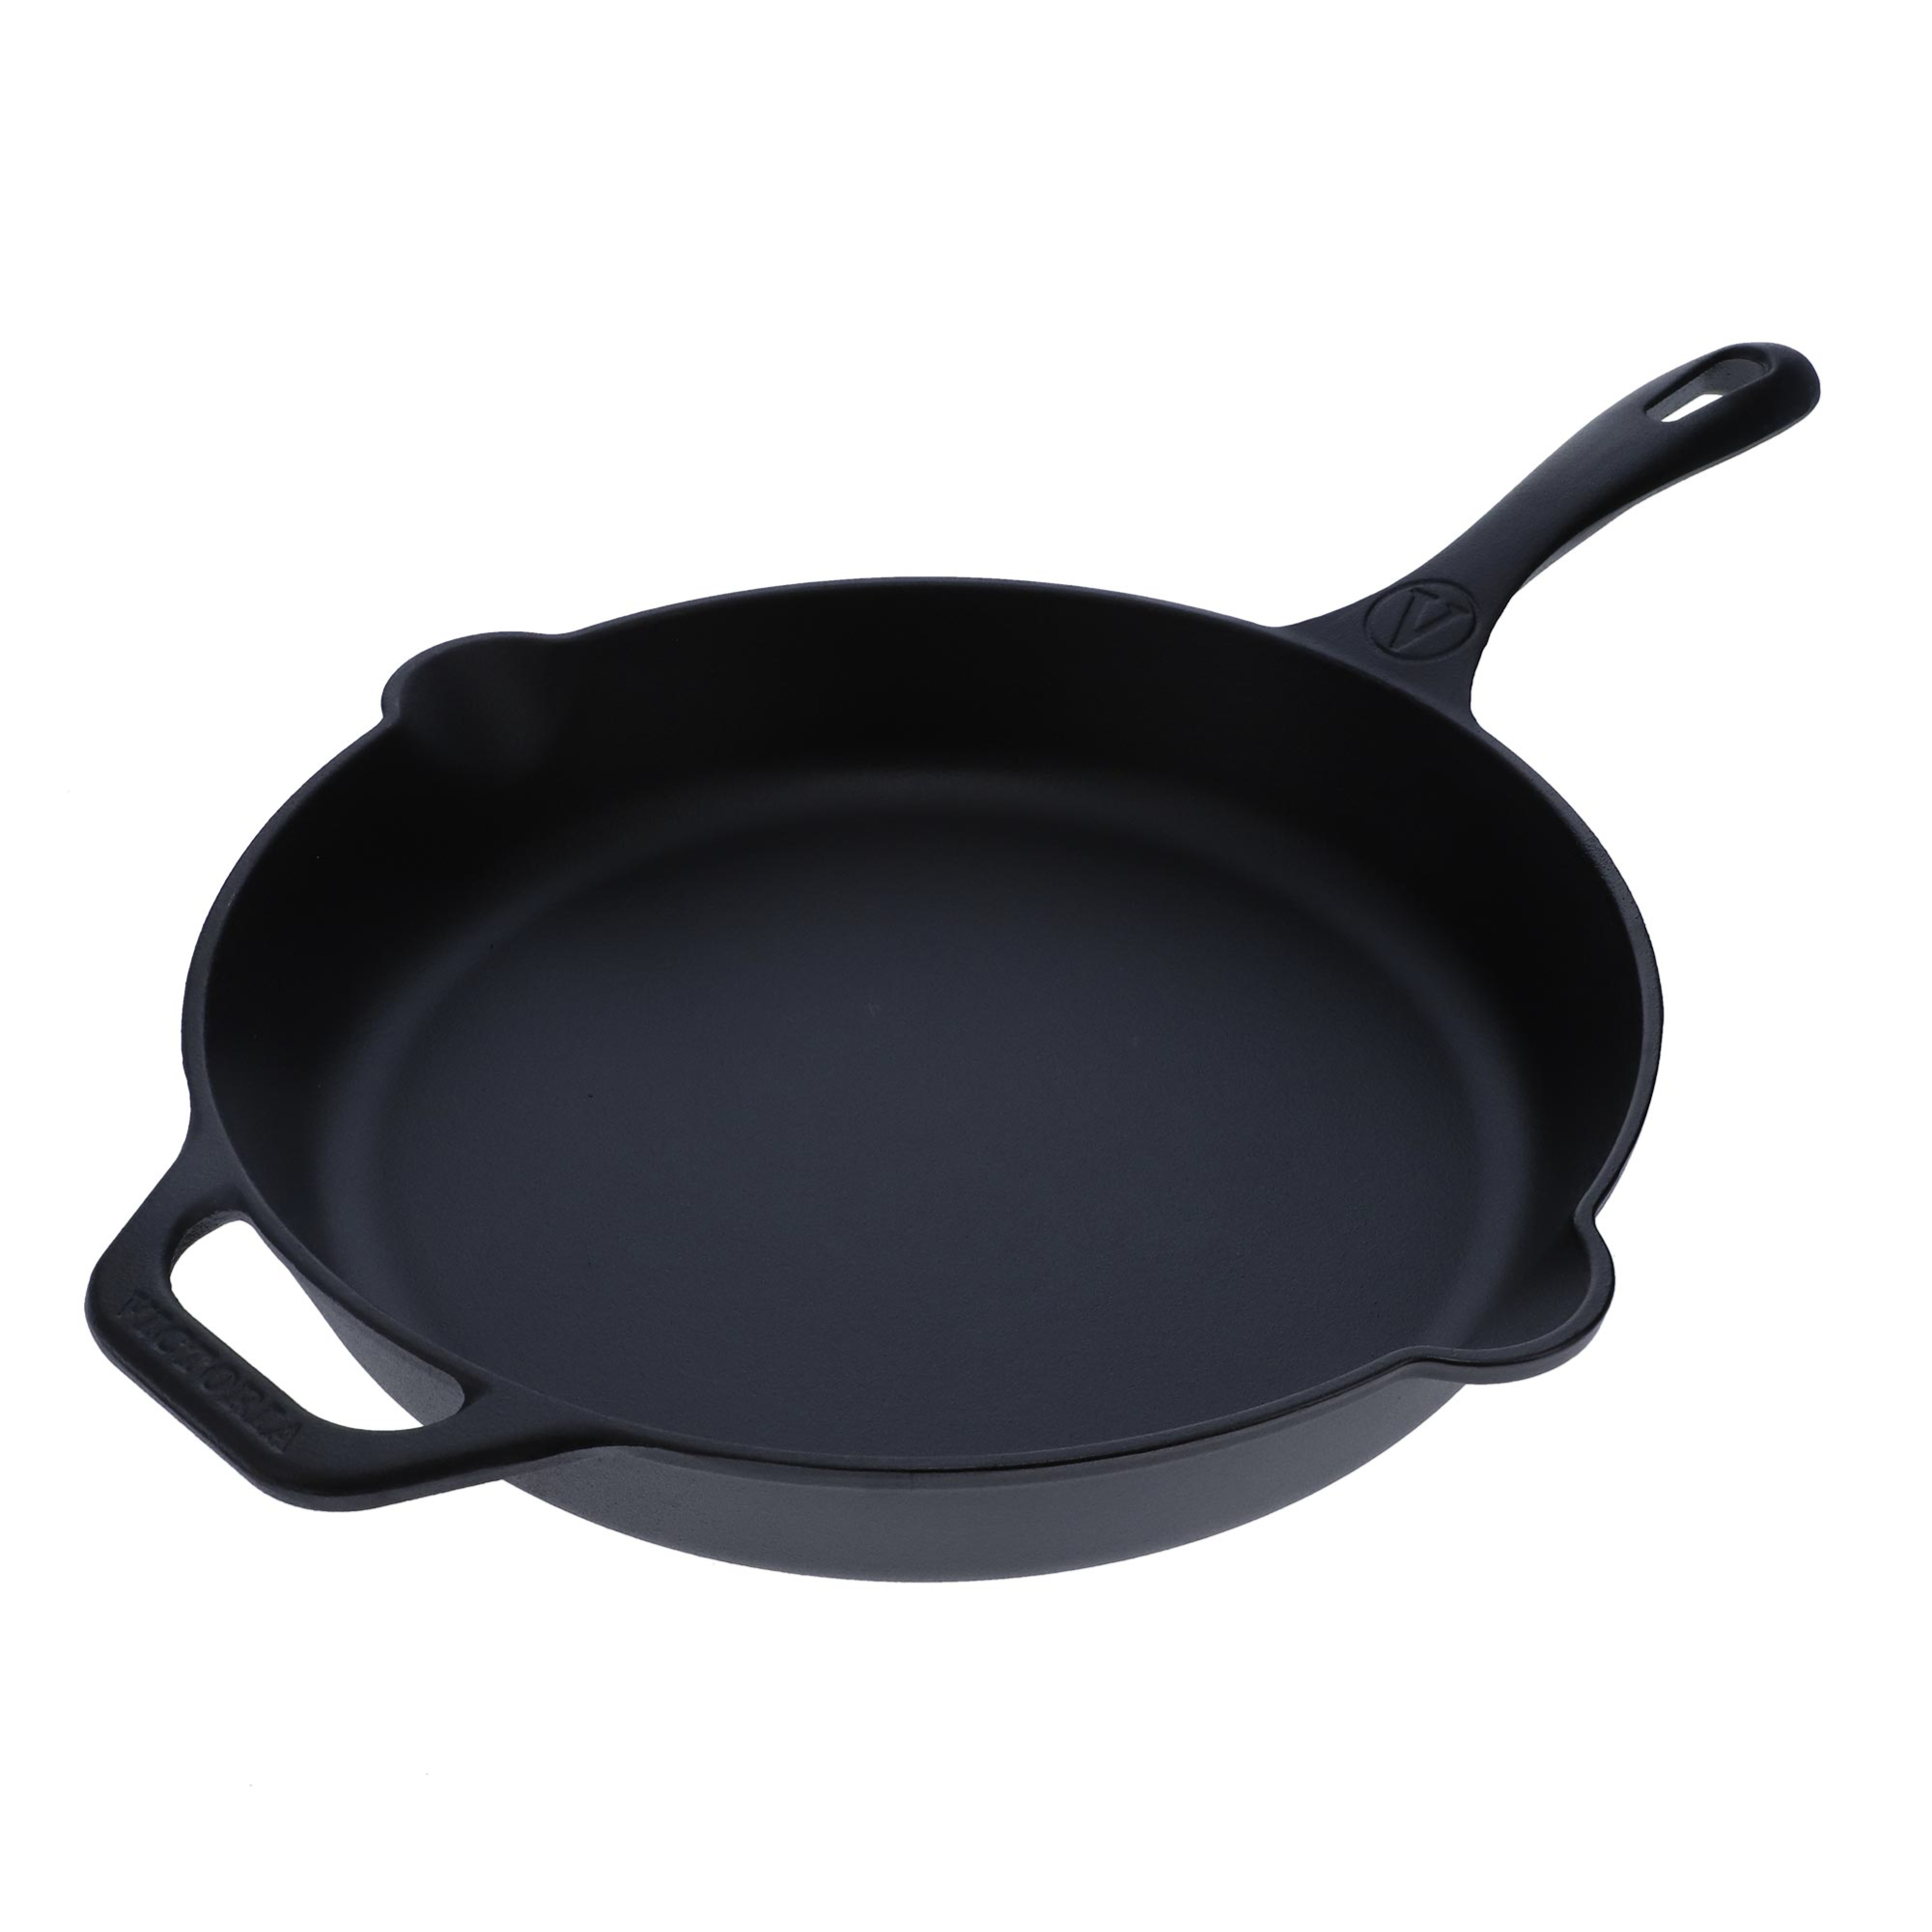 Victoria Cast Iron Skillet, Pre-Seasoned Cast-Iron Frying Pan with Long Handle, Made in Colombia, 12 Inch - image 1 of 5